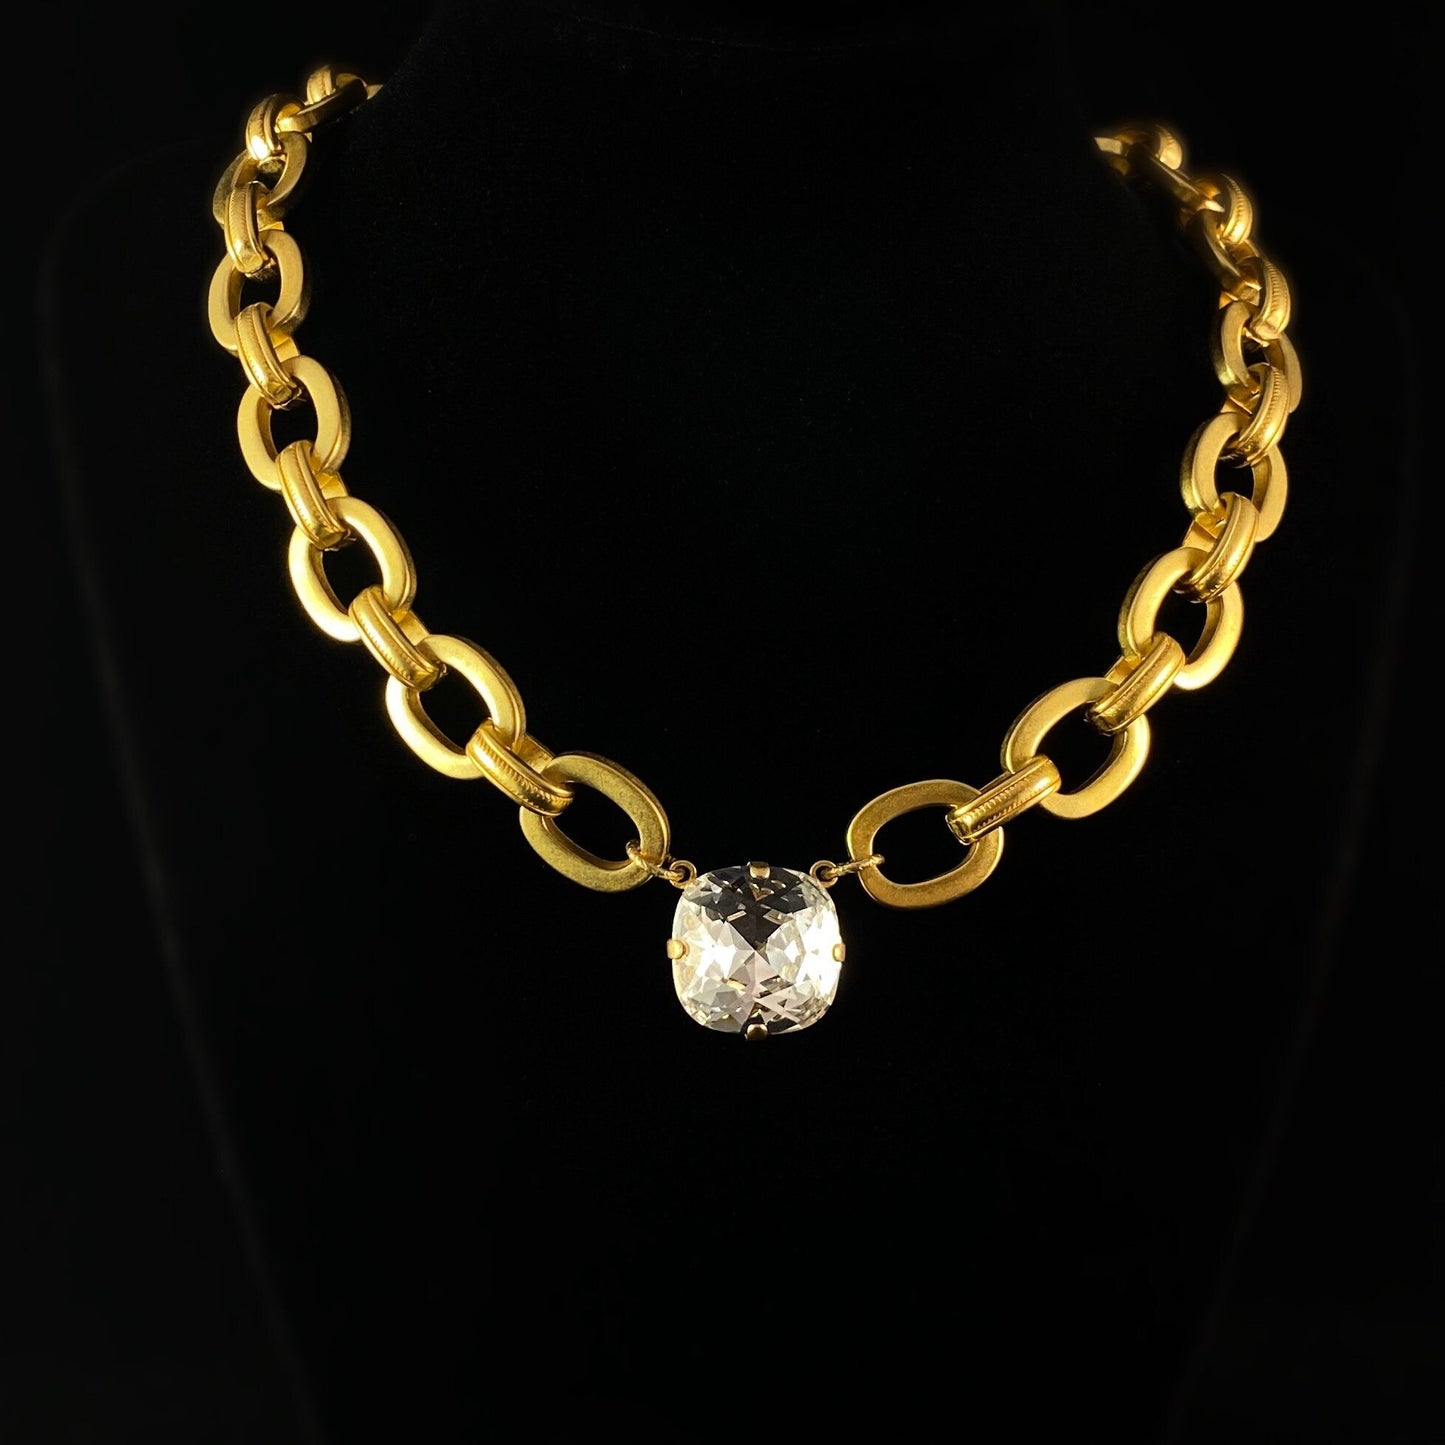 Chunky Gold Chain Necklace with Cushion Cut Clear Swarovski Crystal - La Vie Parisienne by Catherine Popesco